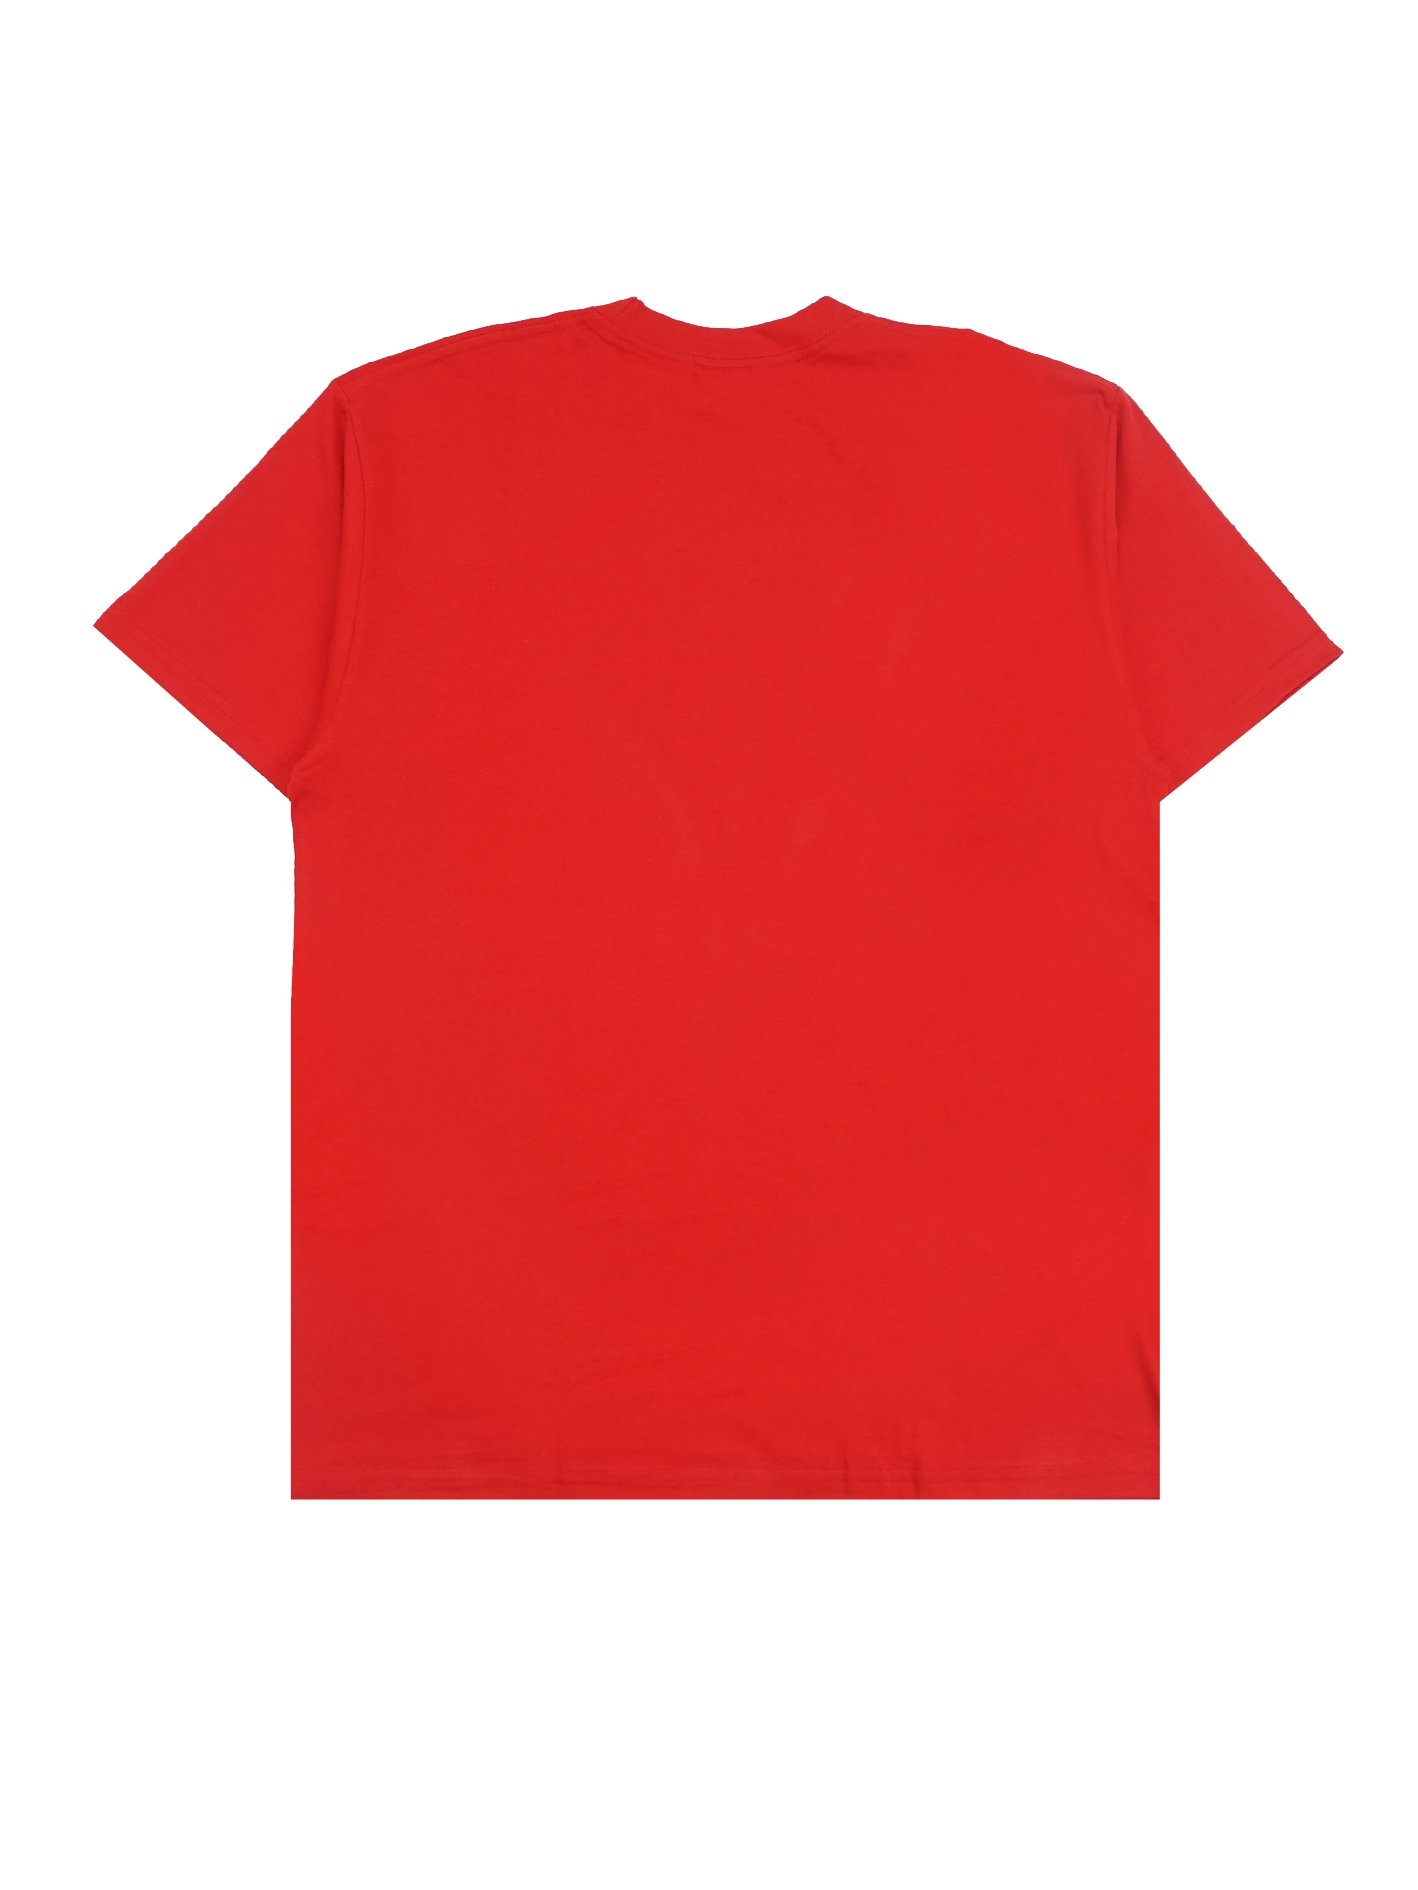 Supreme Orgy Tee Red – WORMHOLE STORE